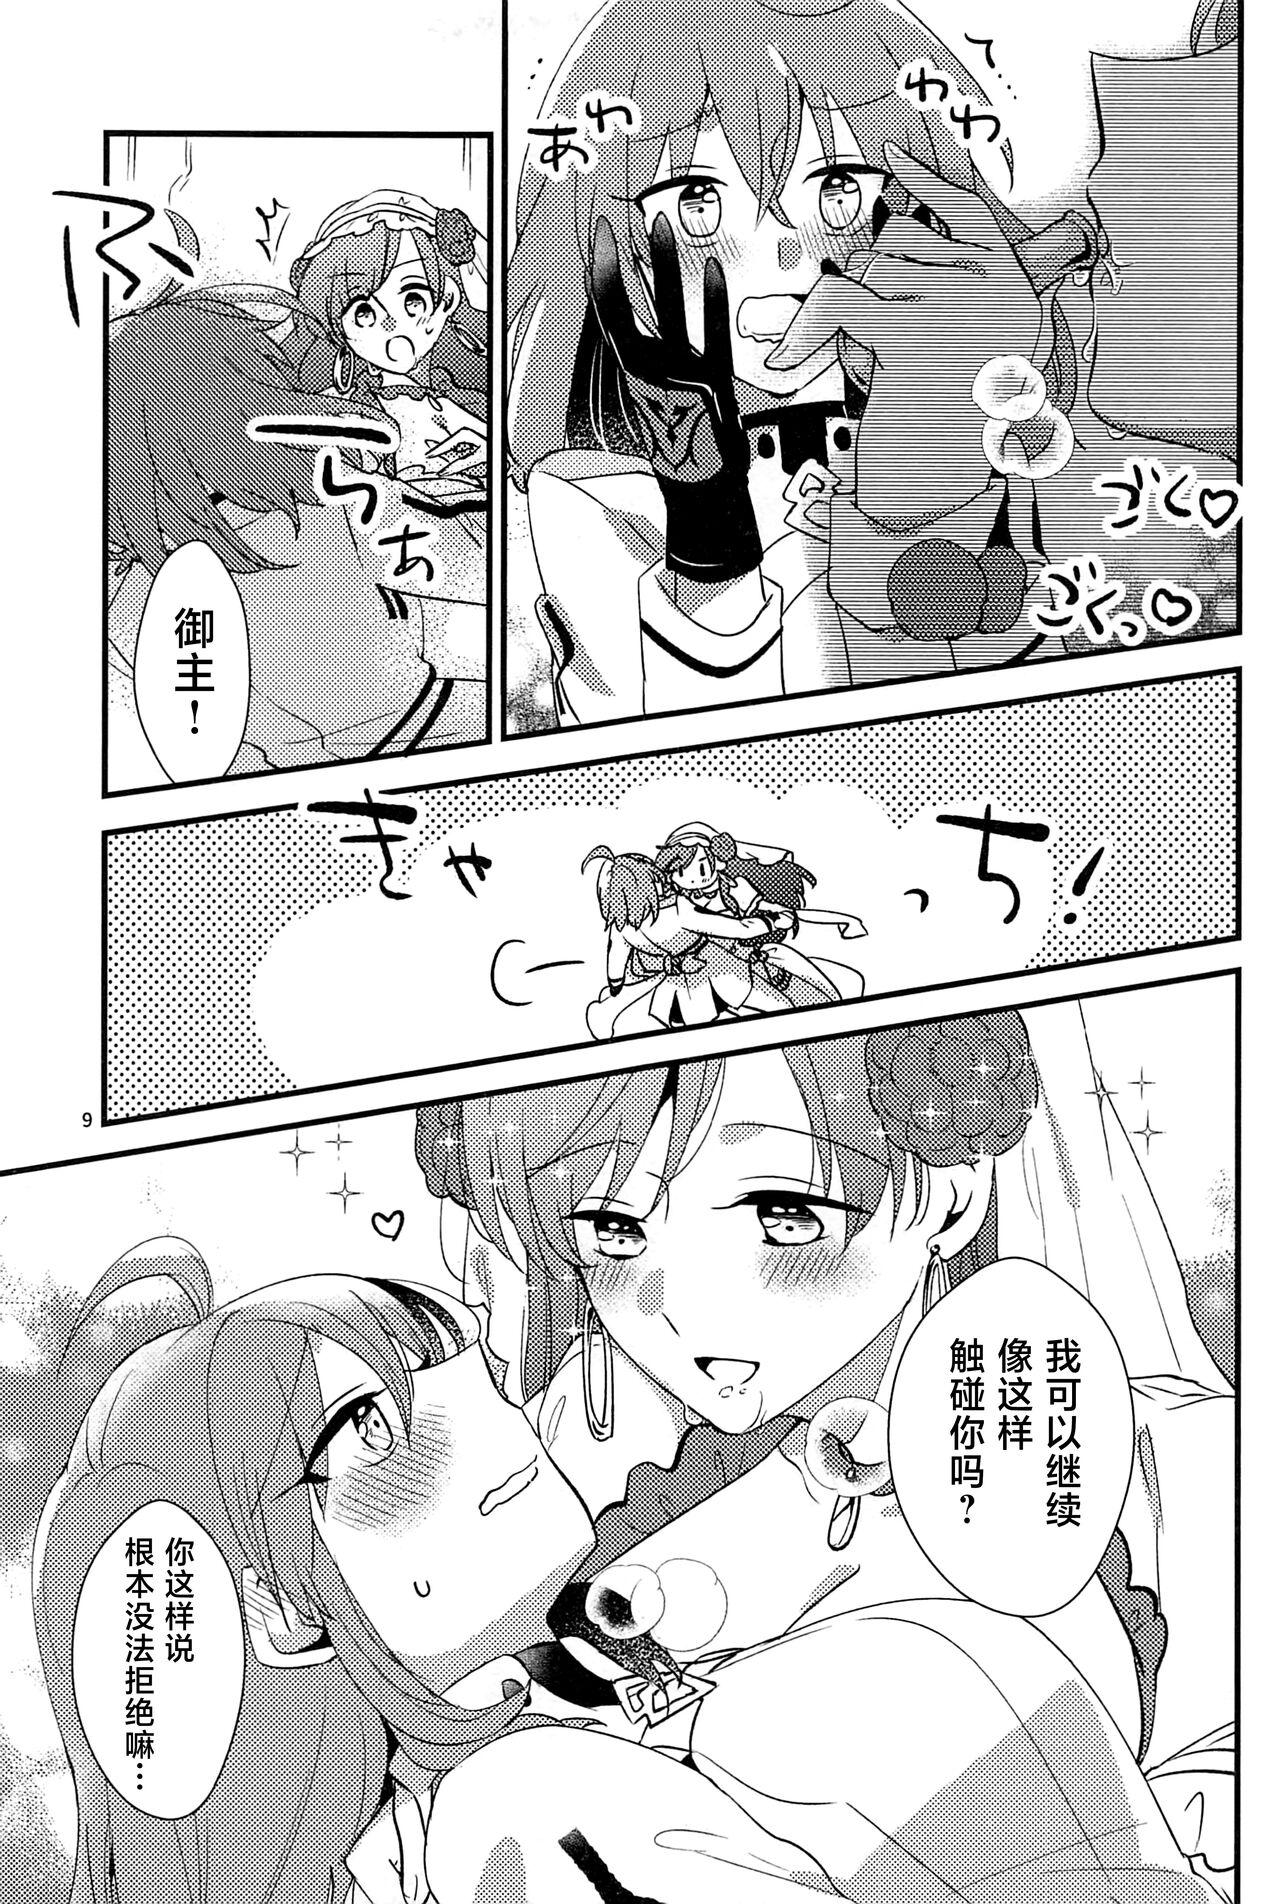 This 媚薬飲まないと出られない部屋MG - Fate grand order Interracial Porn - Page 8